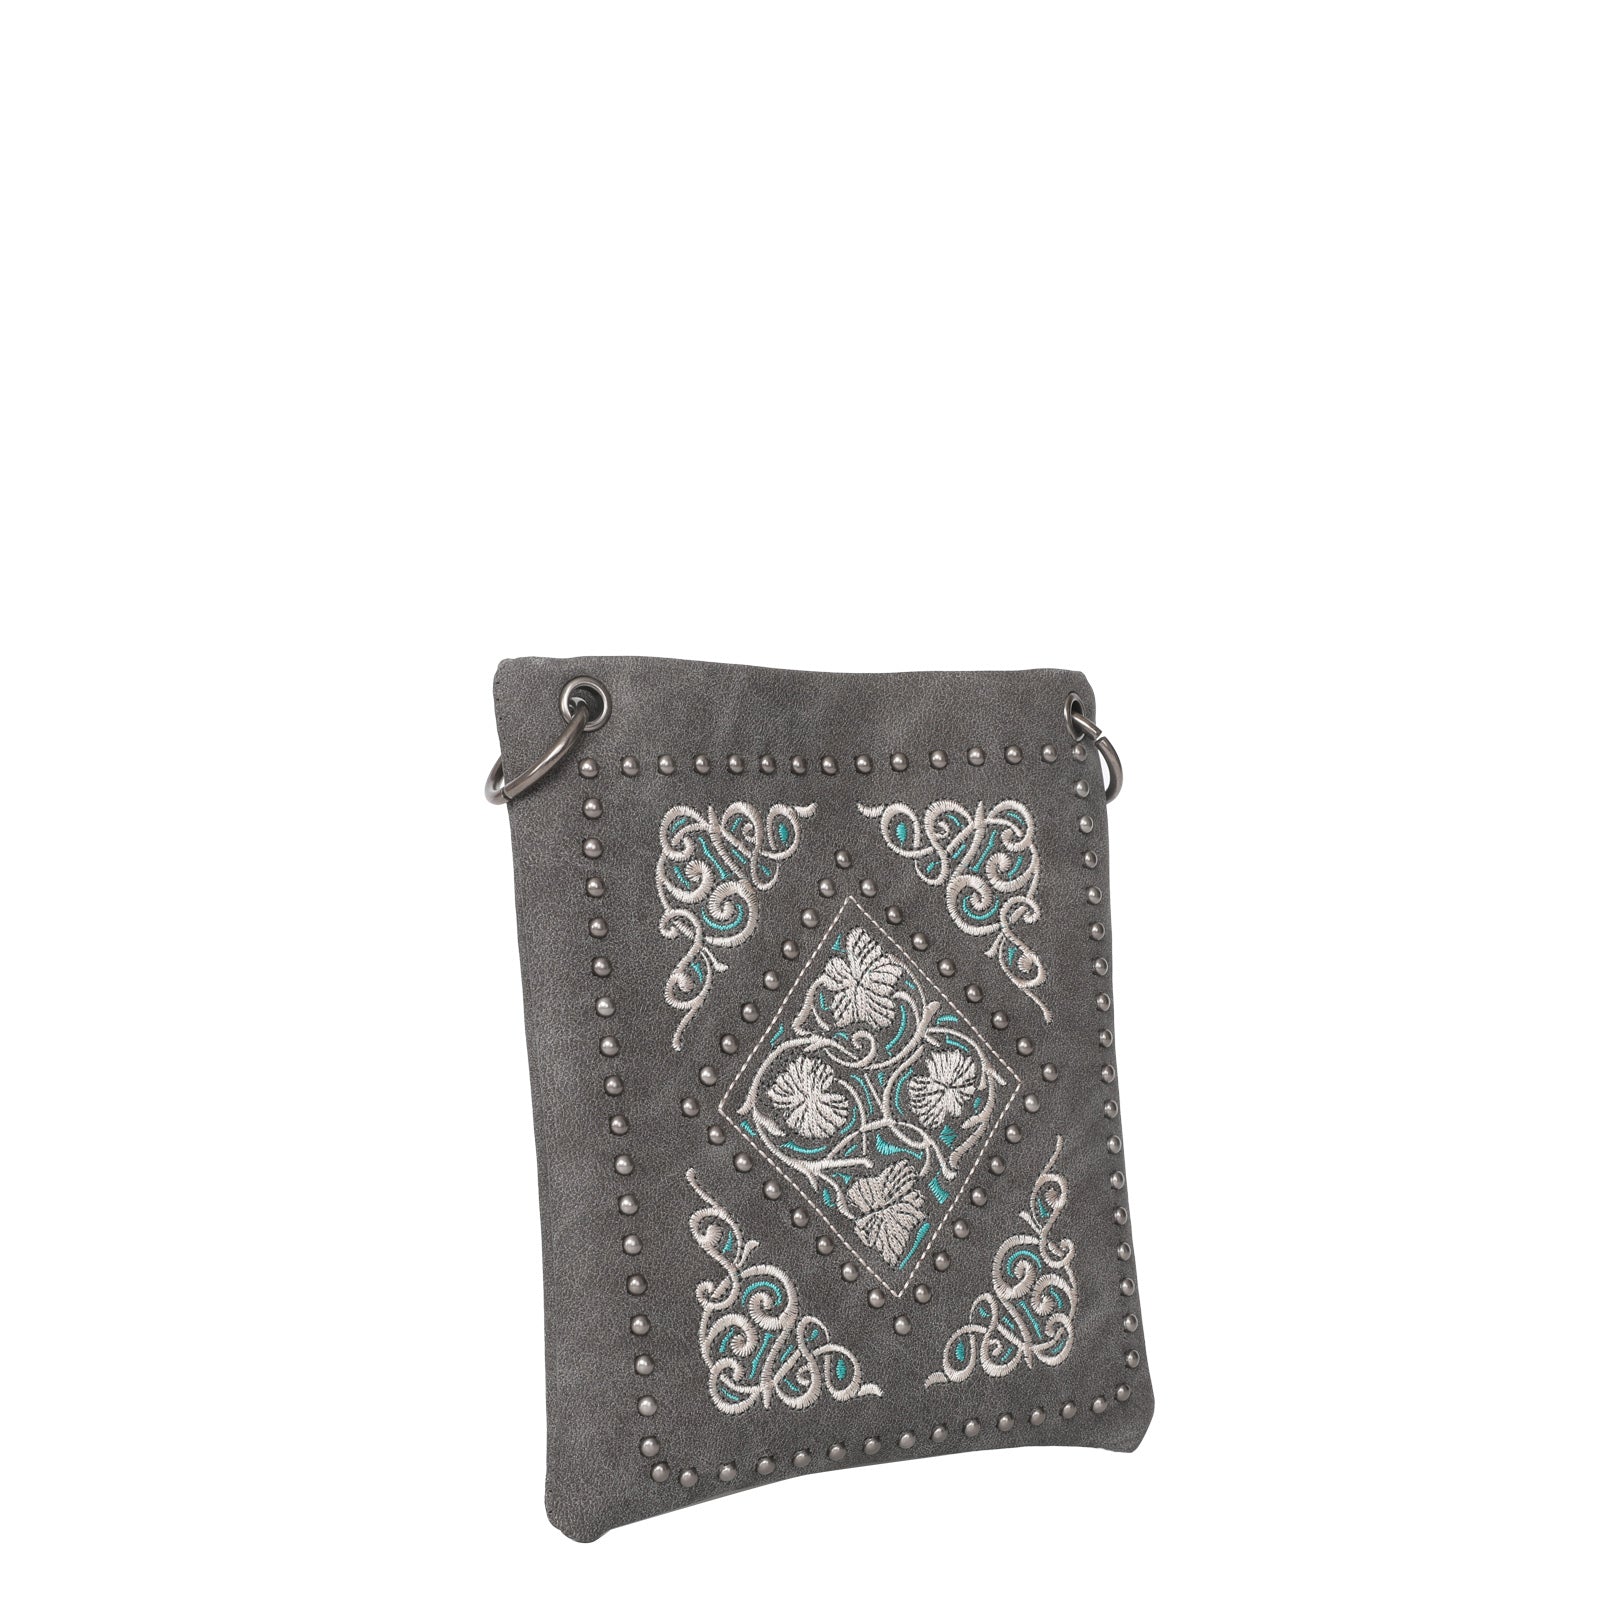 American Bling Embroidered Crossbody Bag - Cowgirl Wear